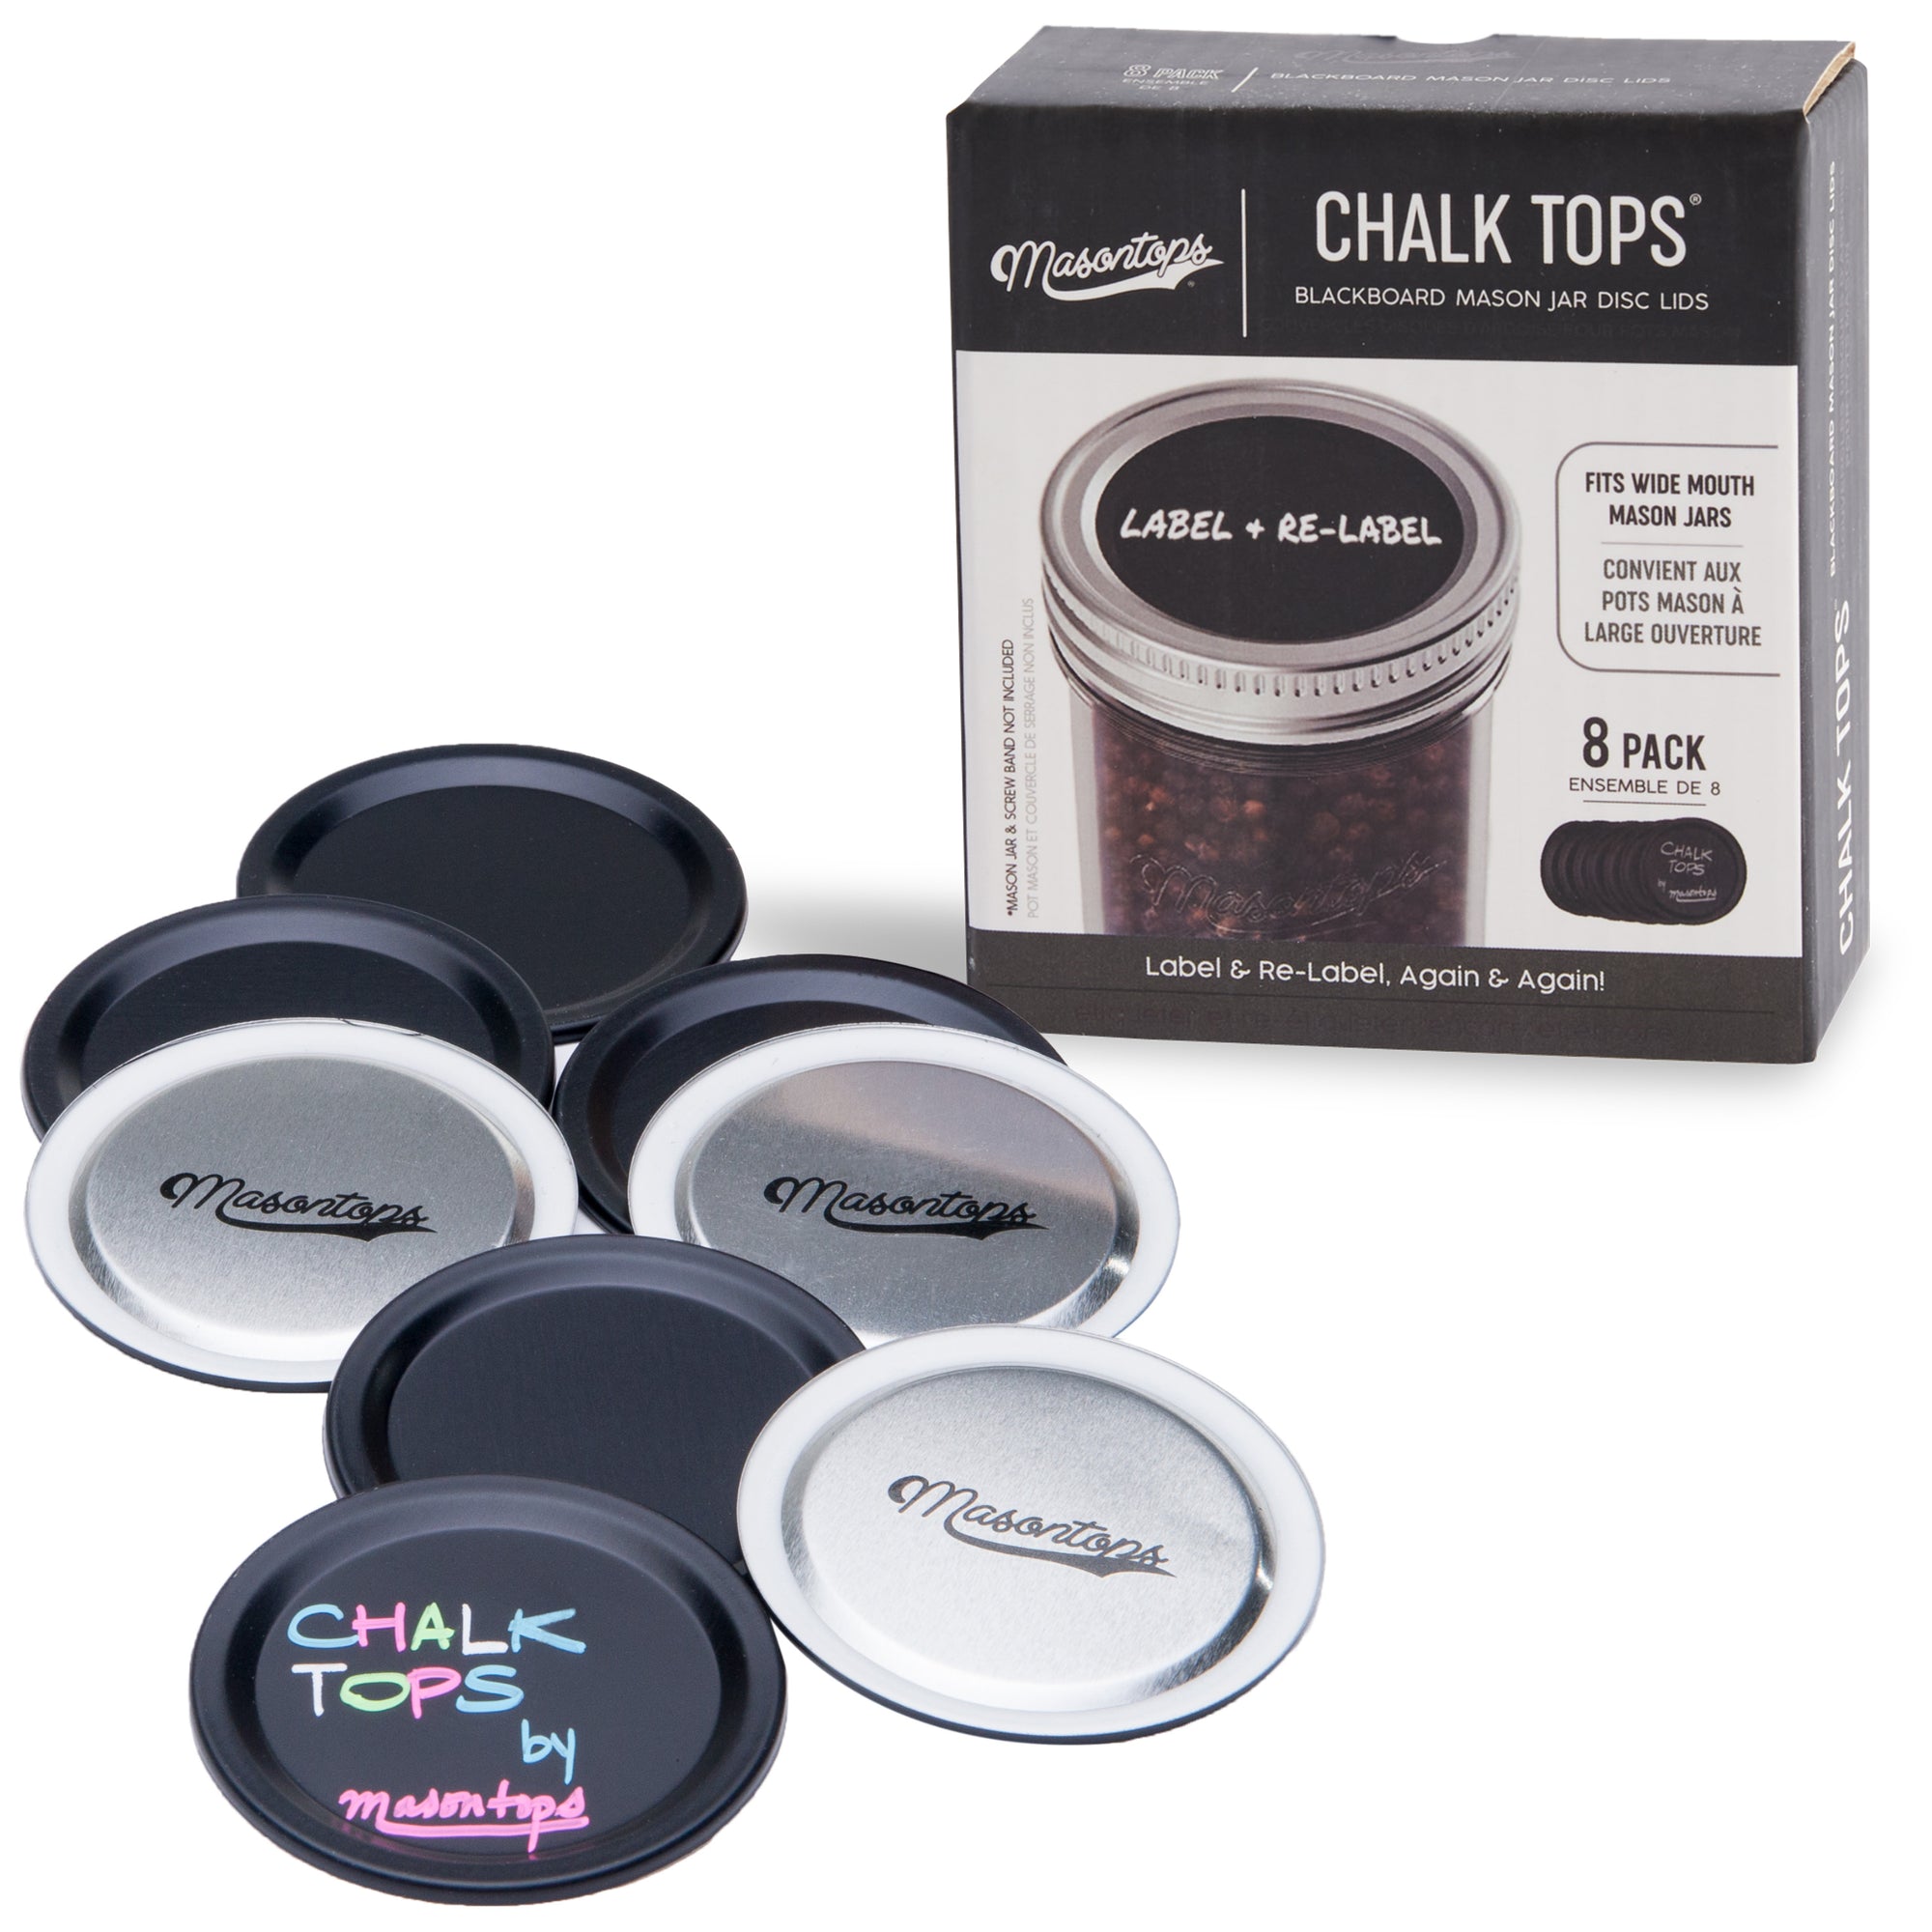 chalk tops and chalk top box on the white background